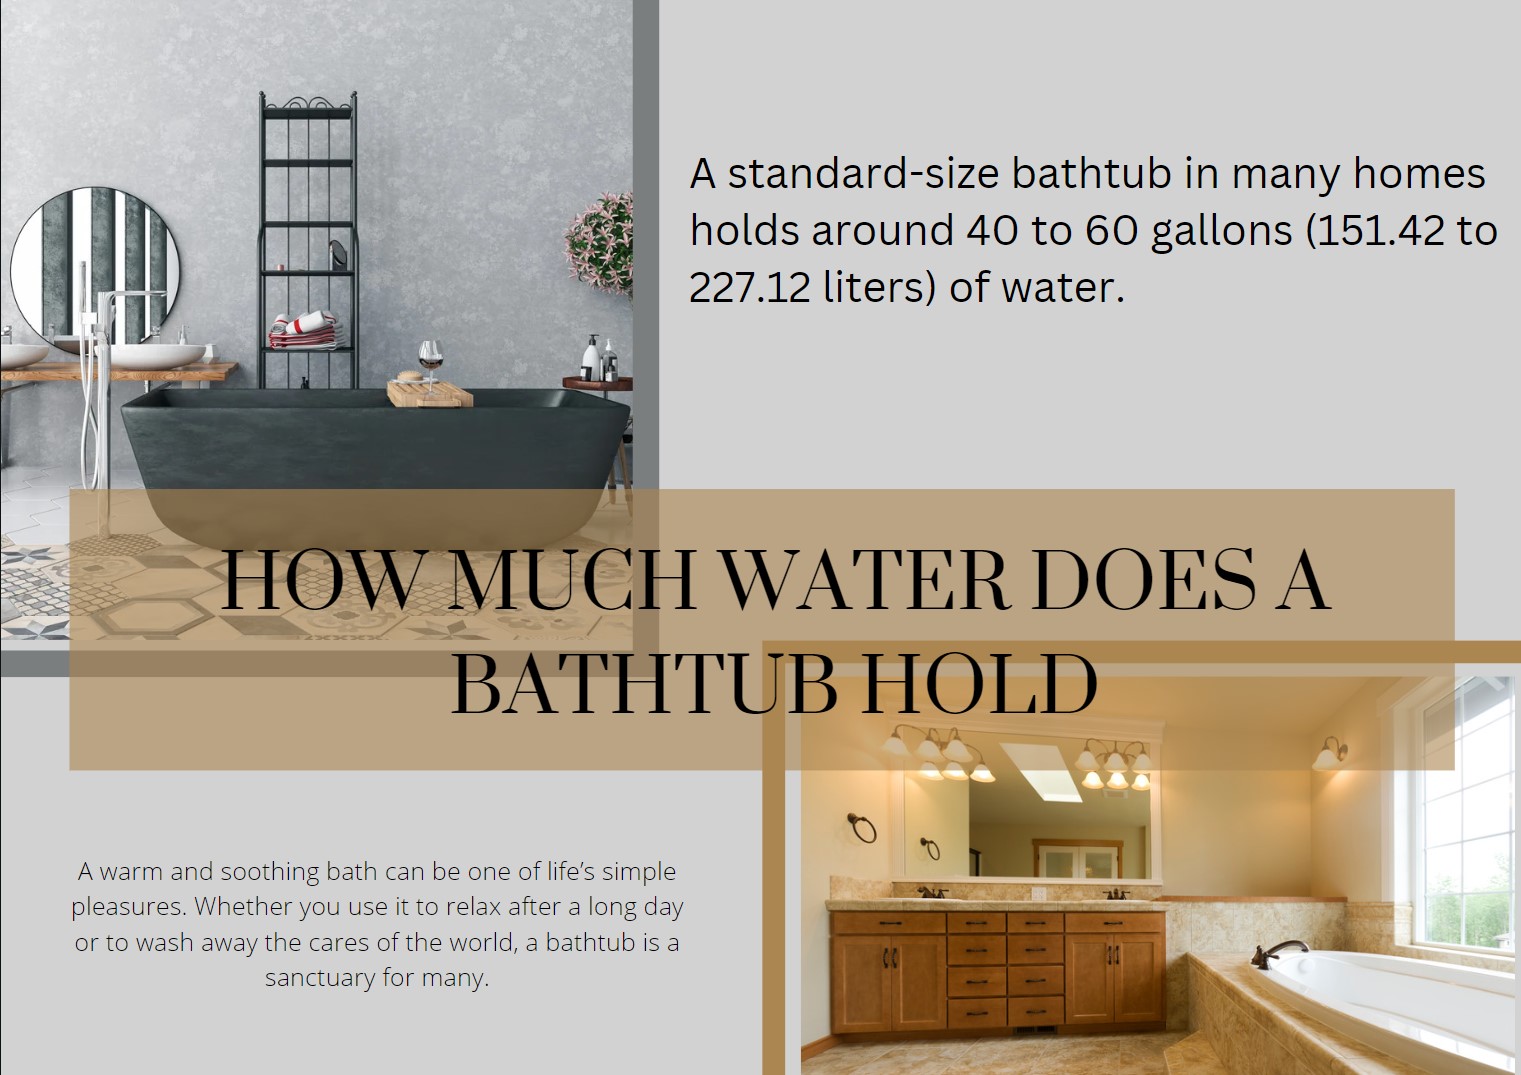 How Much Water Does a Bathtub Hold